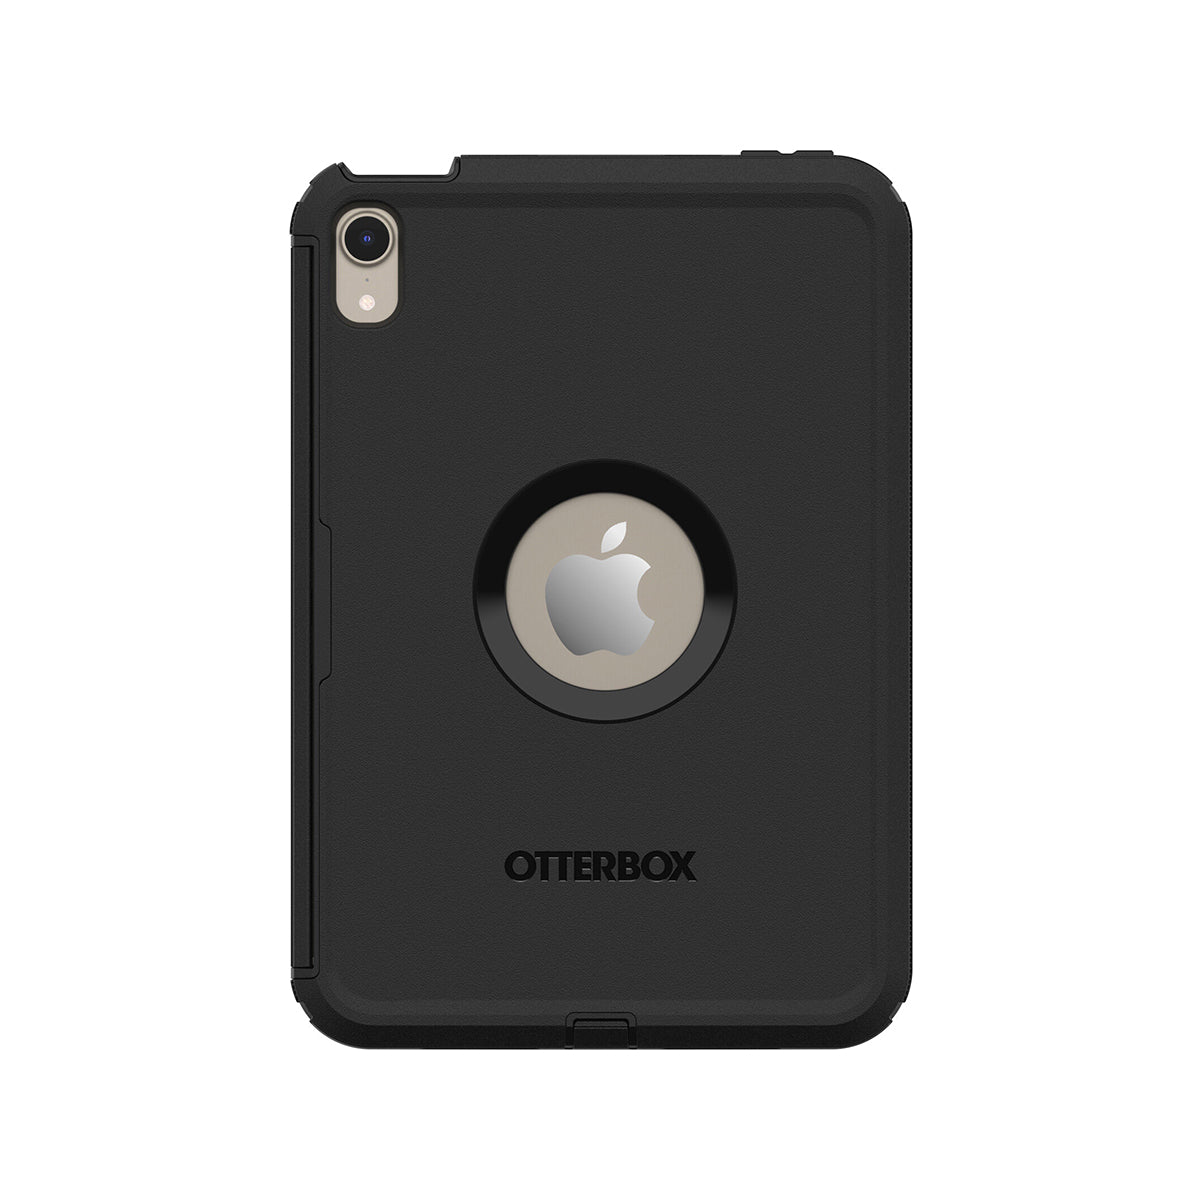 Otterbox Defender Tablet Case for iPad Mini 6